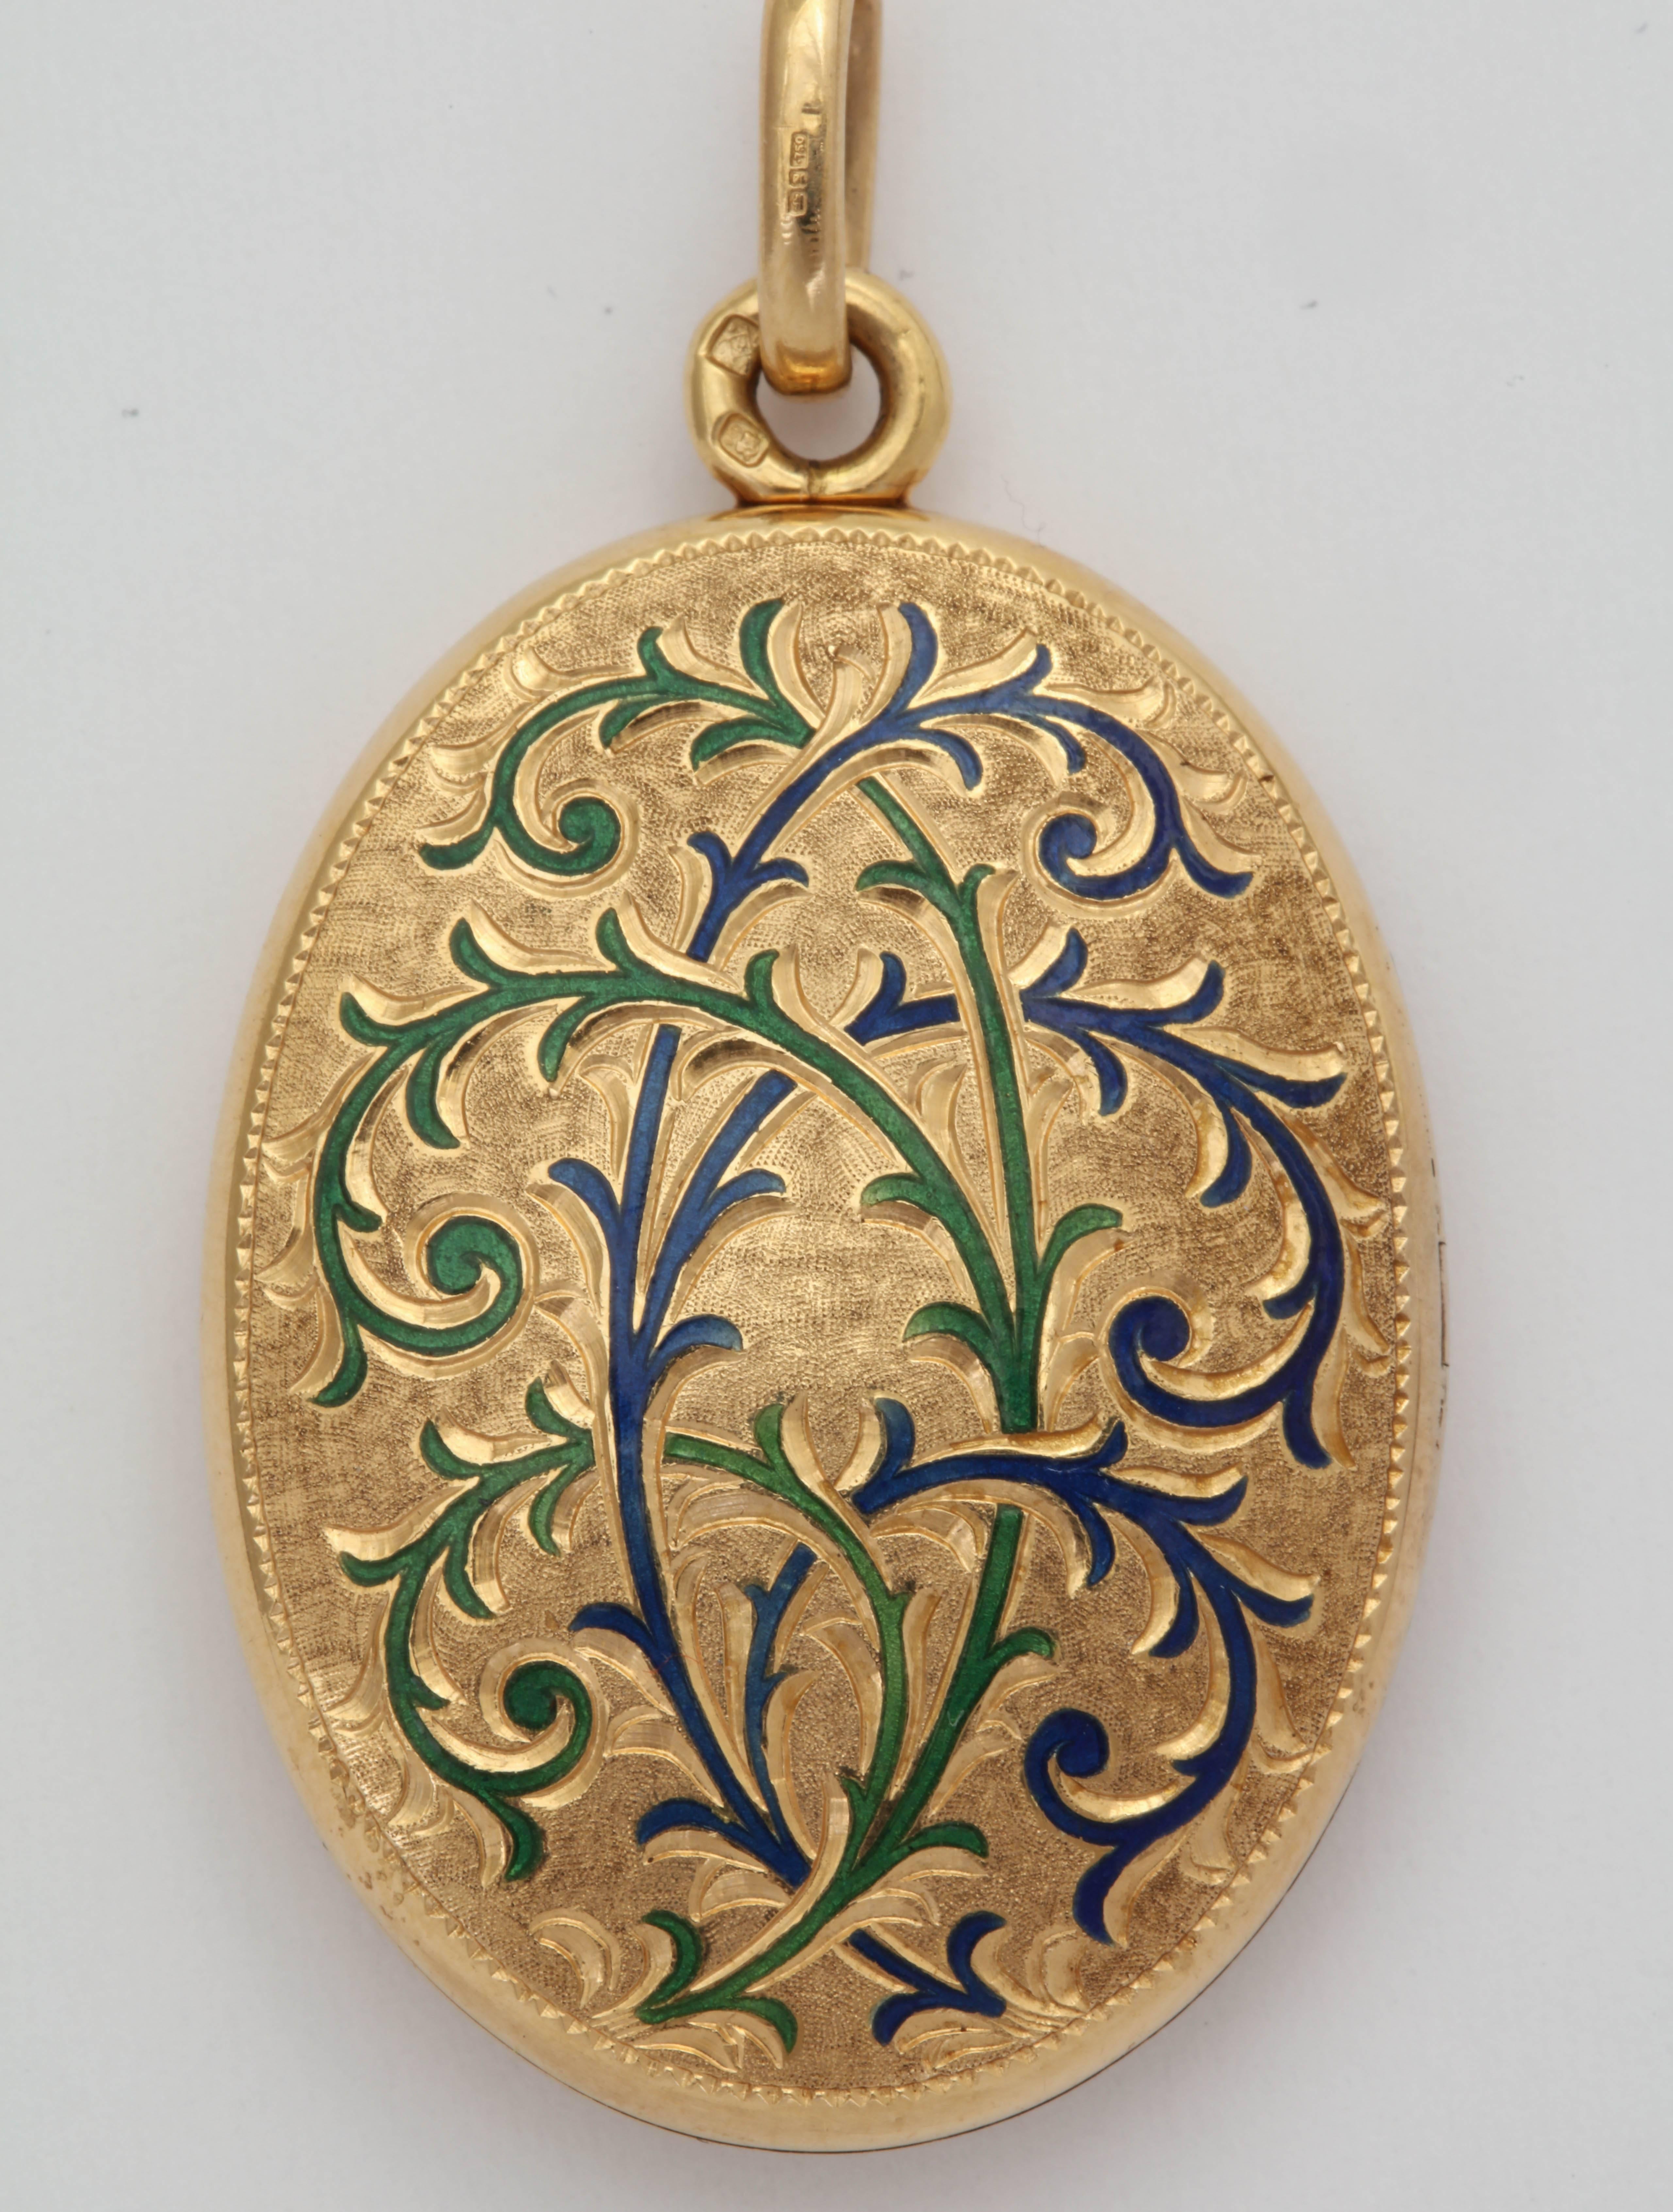 Made in the 70s in England, yet reflecting the turn of the century Art Nouveau style, this locket is beautifully made in 18kt. Engraving throughout the front and minimally on the back. The front has blue and green enamel.